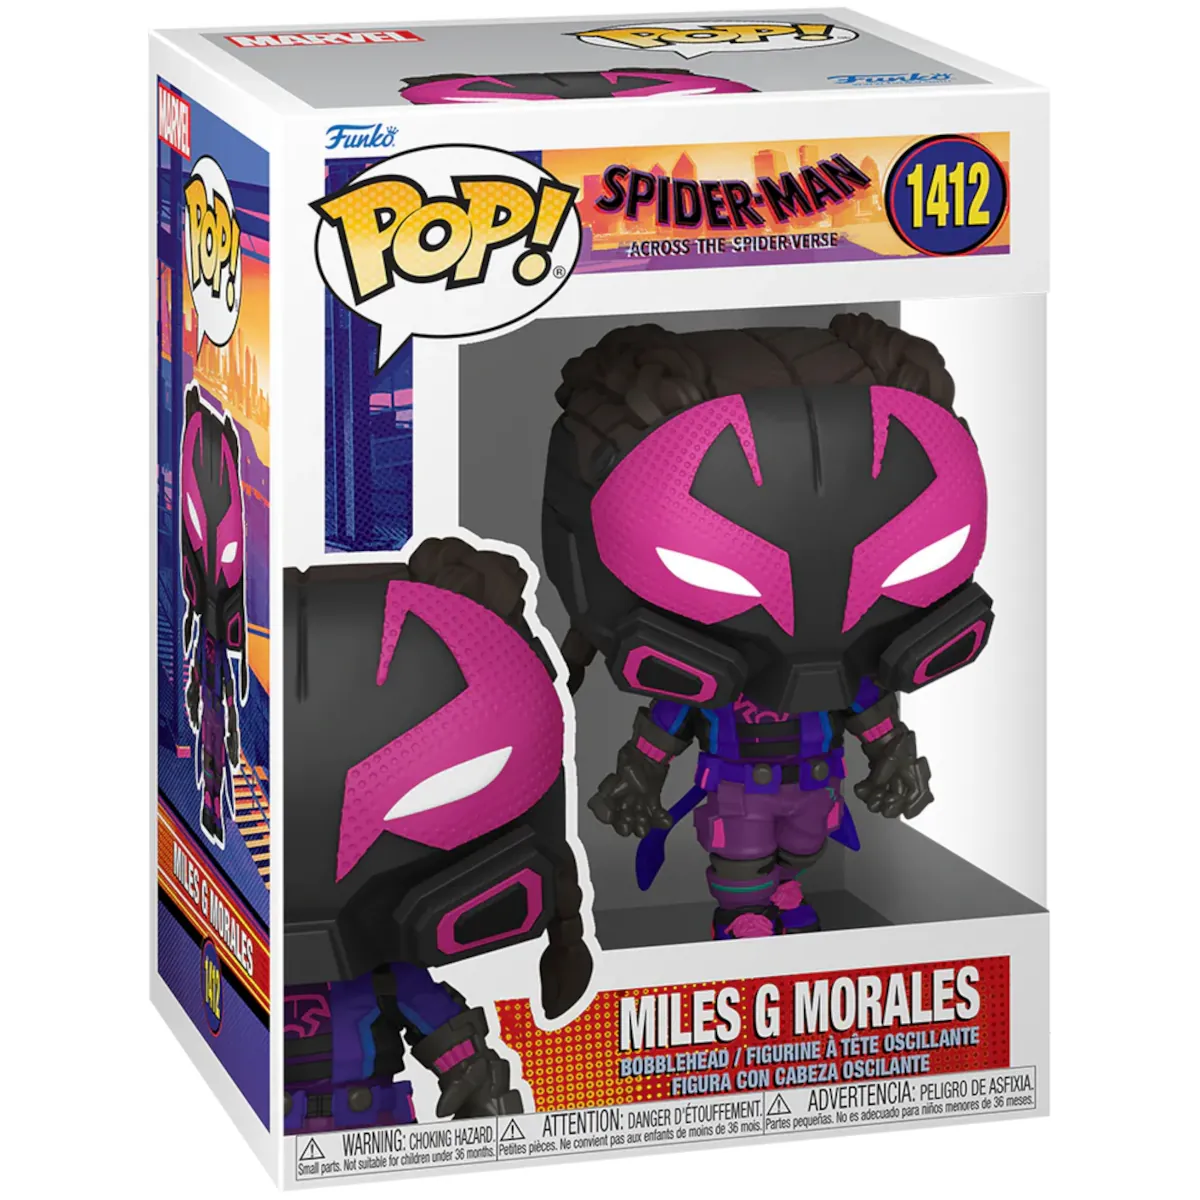 82650 Funko Pop! Movies - Spider-Man Across the Spider-Verse - Prowler (Miles G Morales) Collectable Vinyl Figure Box Front